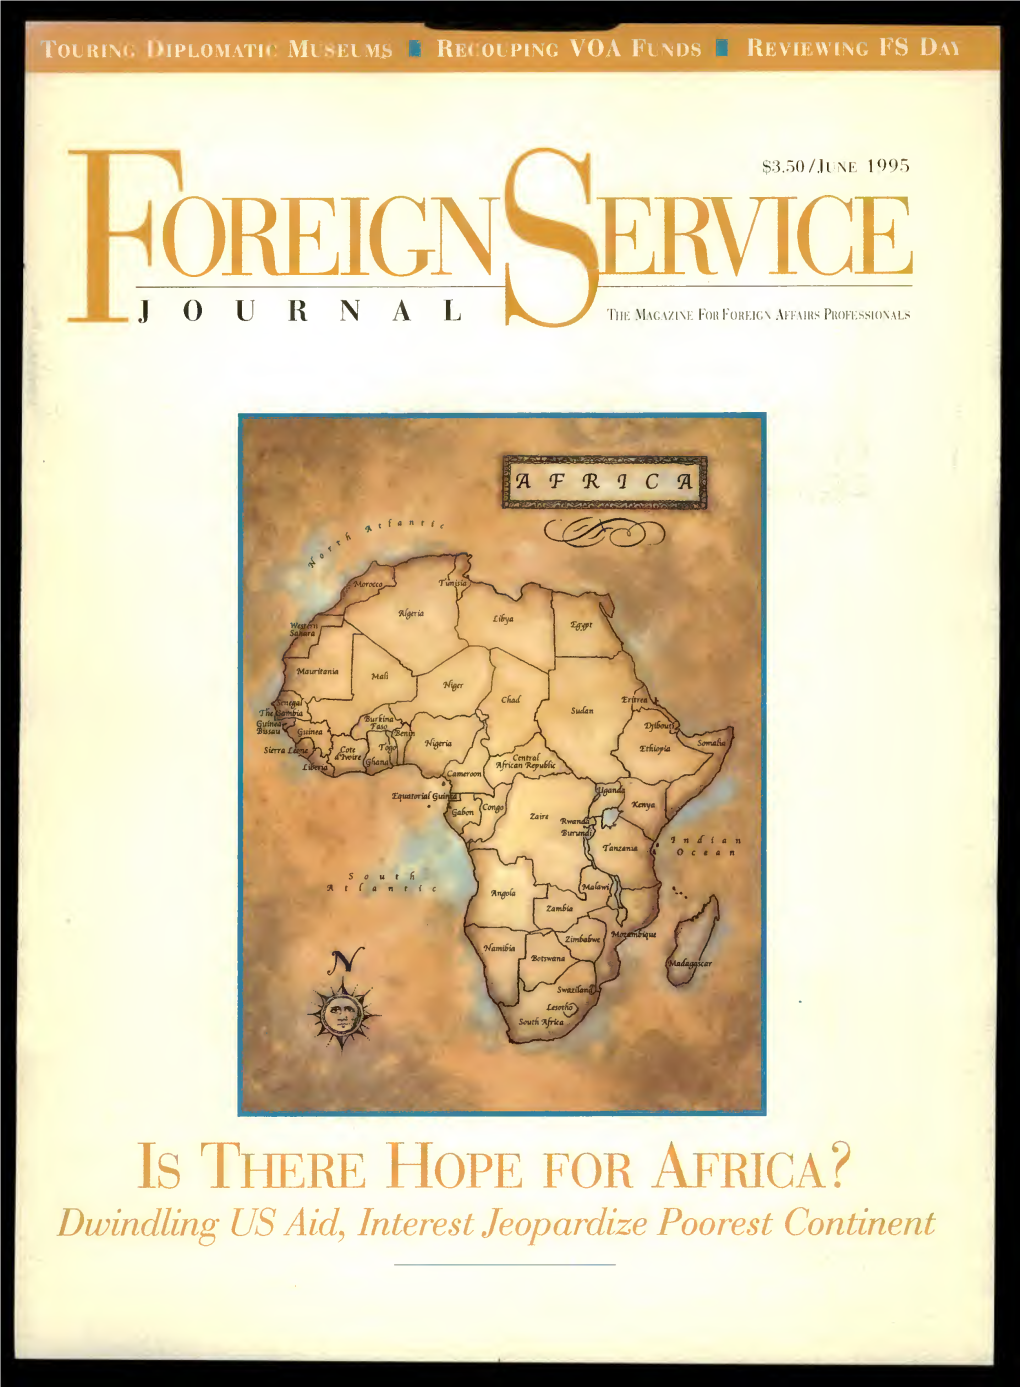 The Foreign Service Journal, June 1995